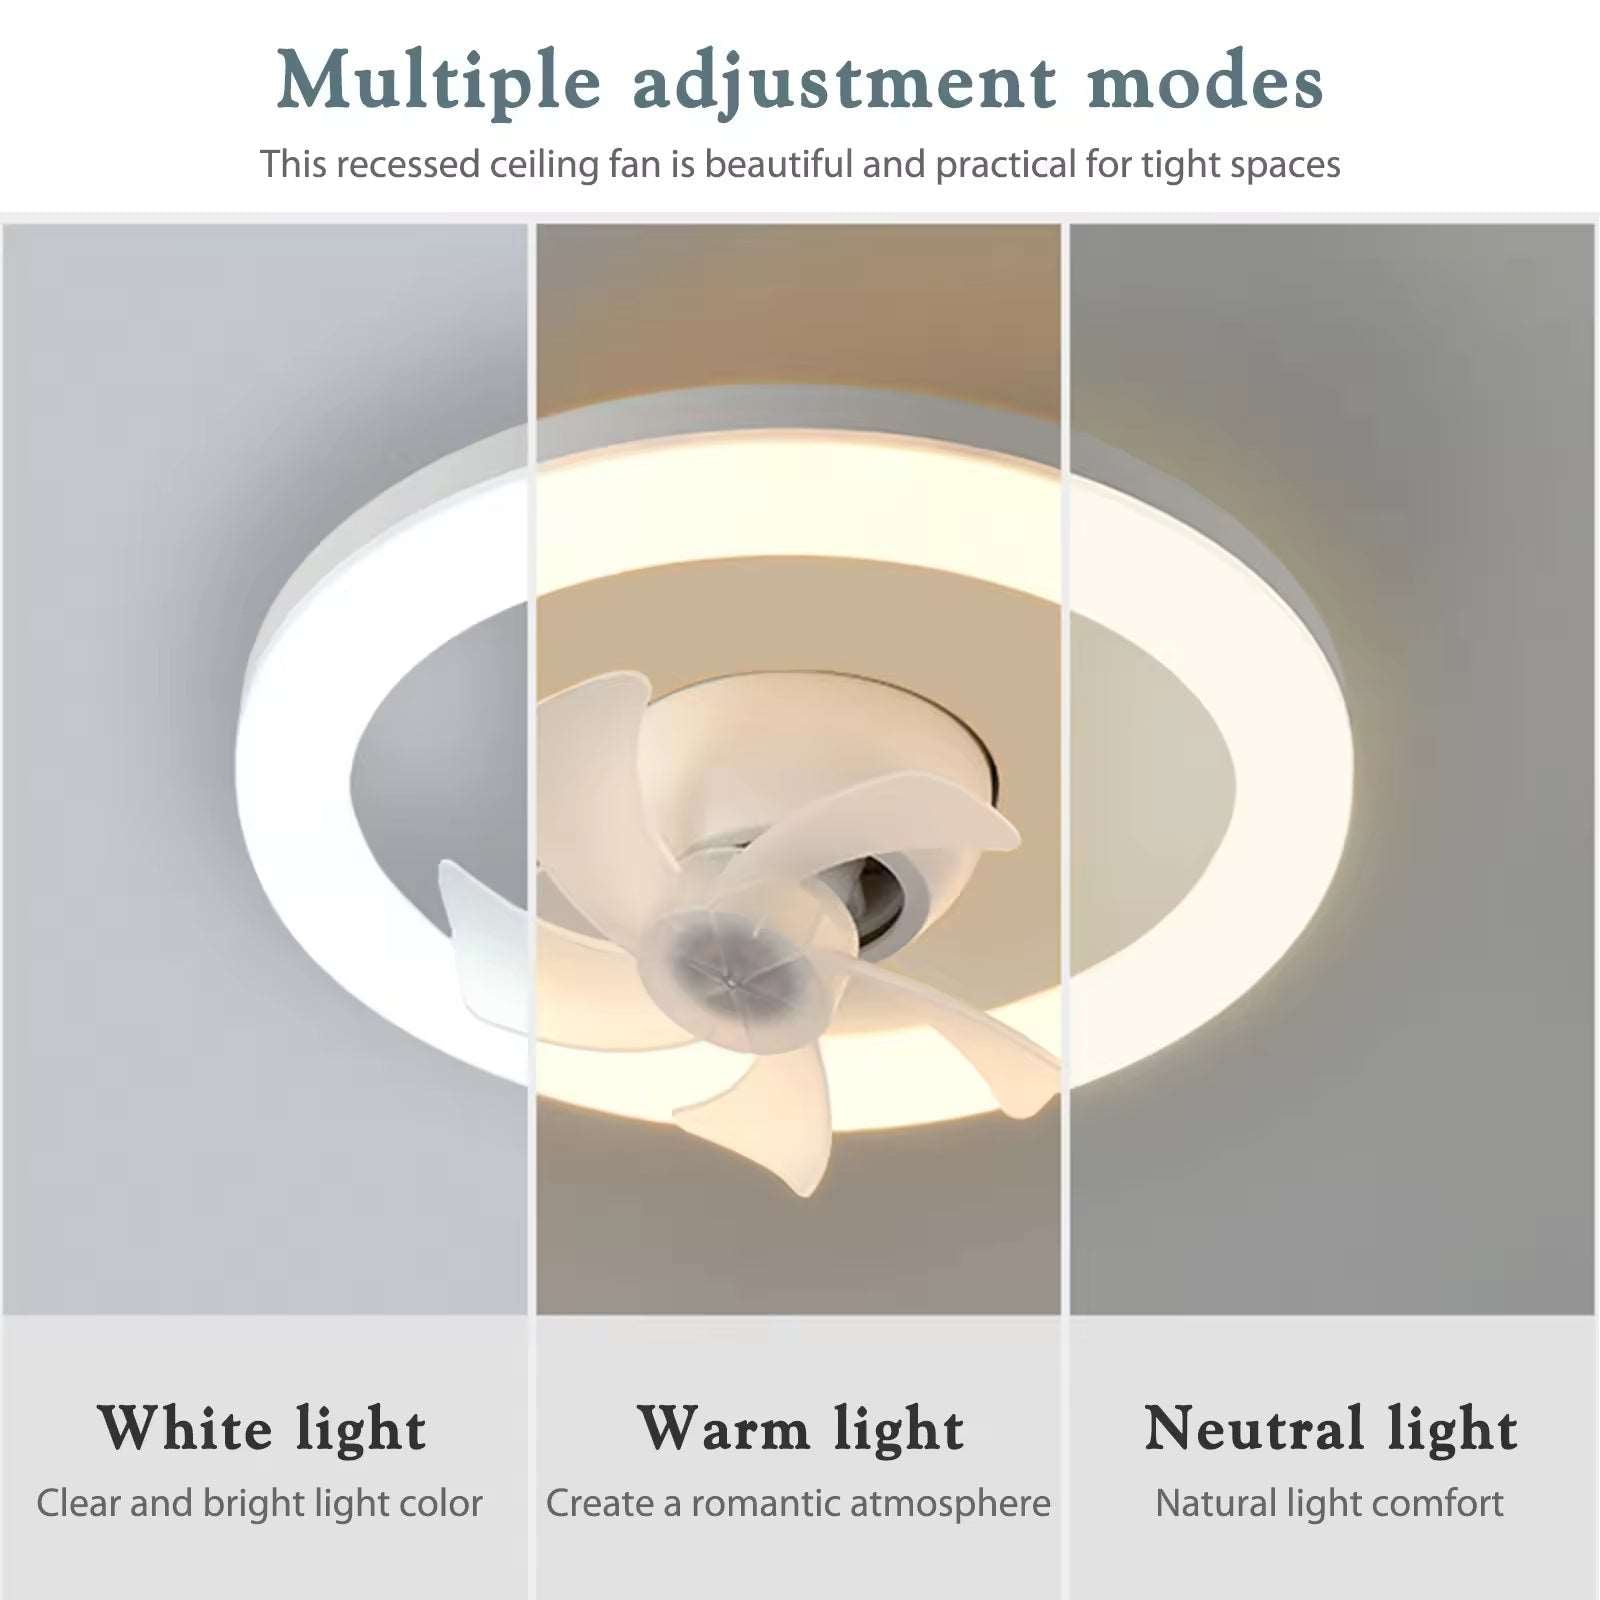 360 Rotating 48W Ceiling Fan E27 With Led Light And Remote Control 360 Rotation Cooling Electric fan Lamp Chandelier For Room Home Decor - Choice Store